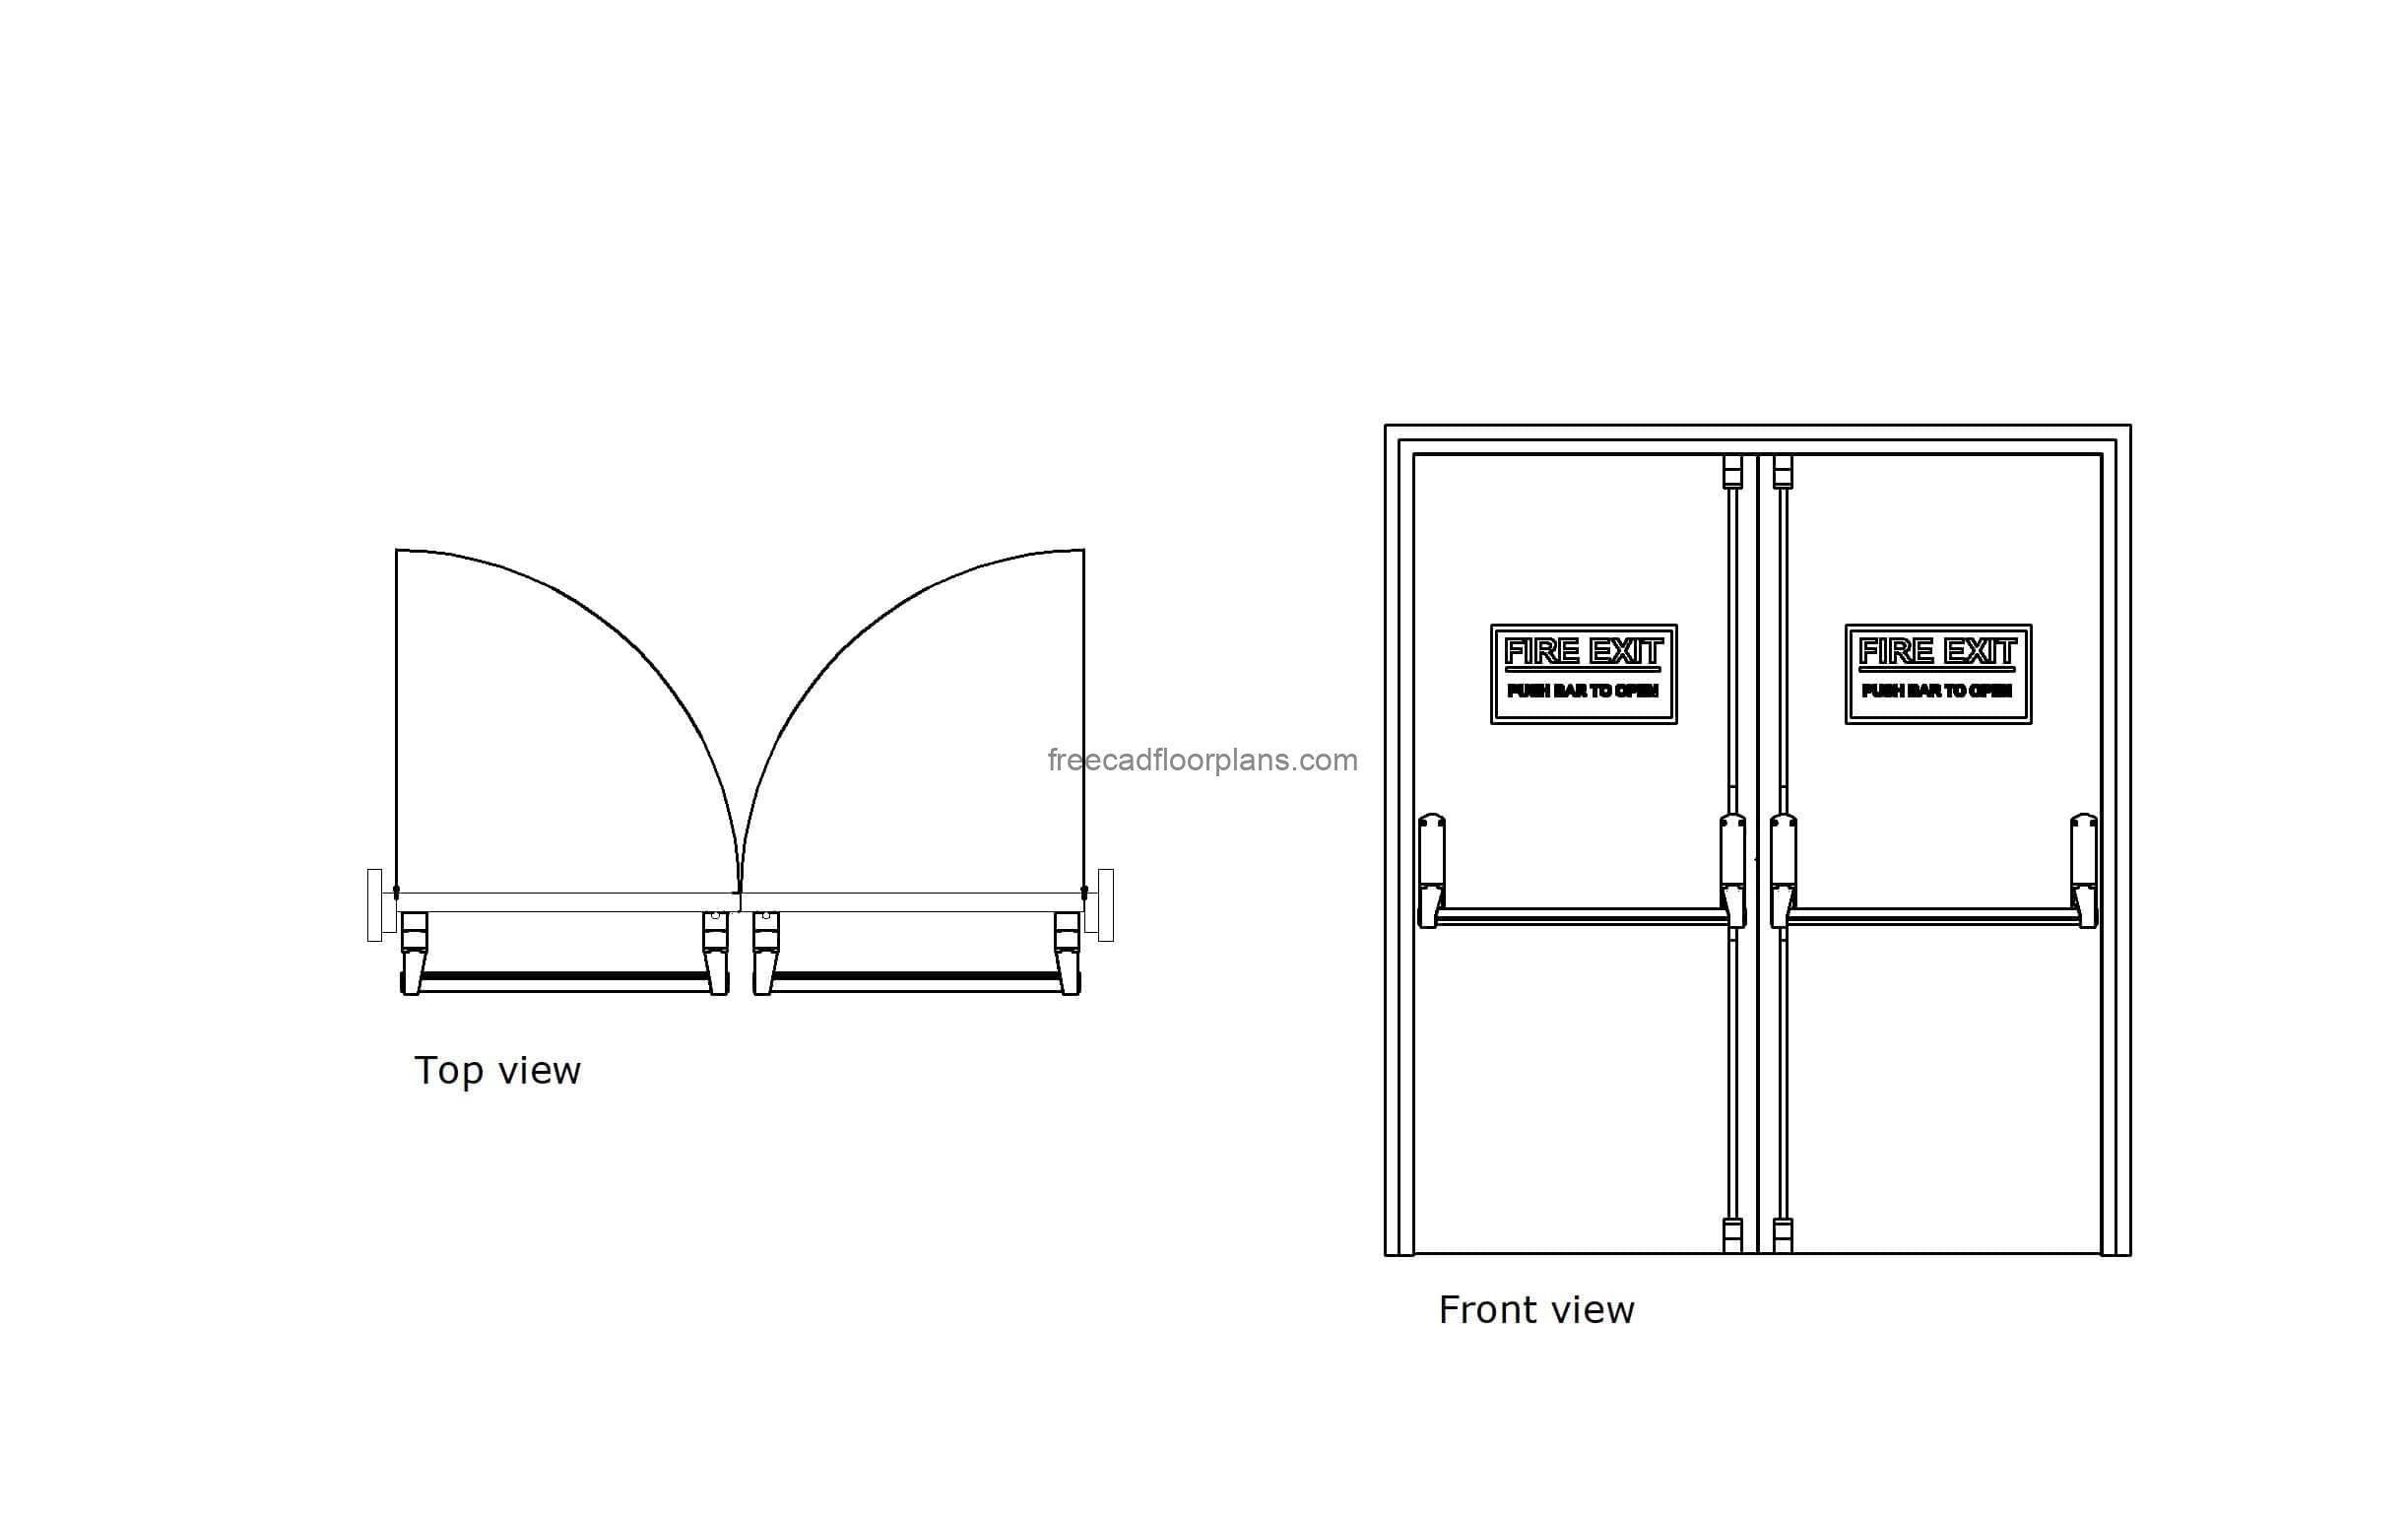 autocad drawing of steel exit fire doors, plan and elevation 2d views, dwg file free for download